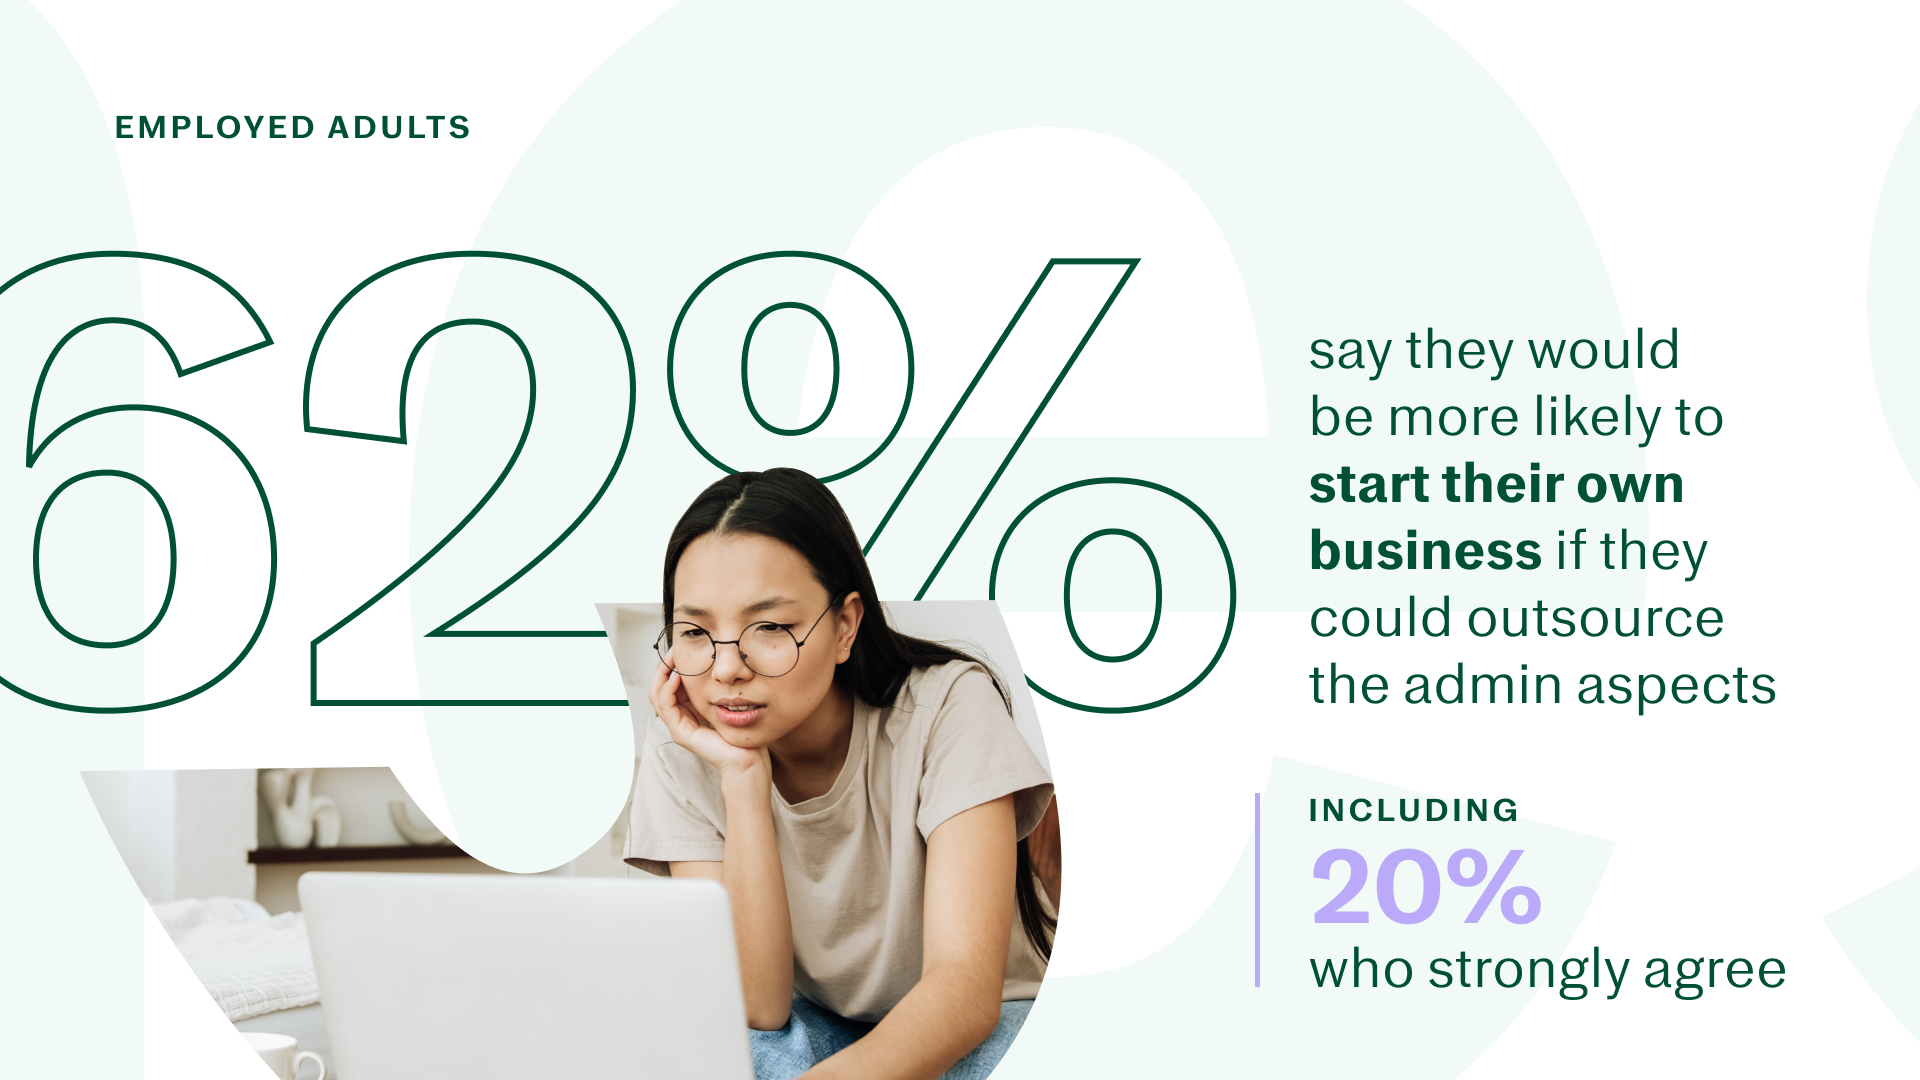 62% of Employed Adults Would Be More Likely to Start Their Own Business If They Could Outsource Admin